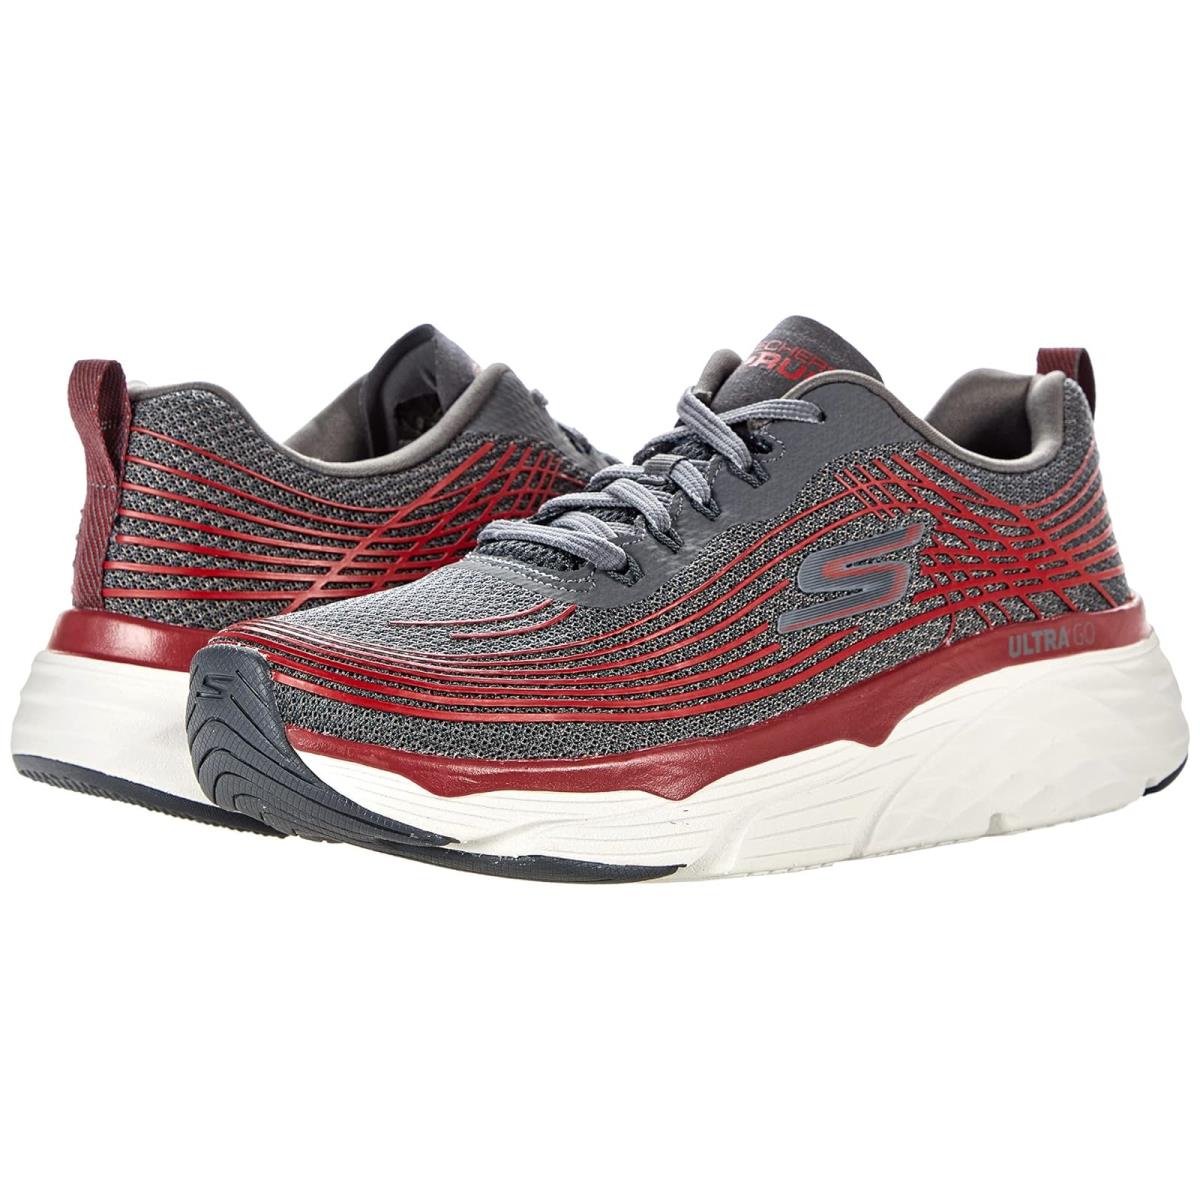 Man`s Sneakers Athletic Shoes Skechers Max Cushion - Elite - 54430 Charcoal/Red